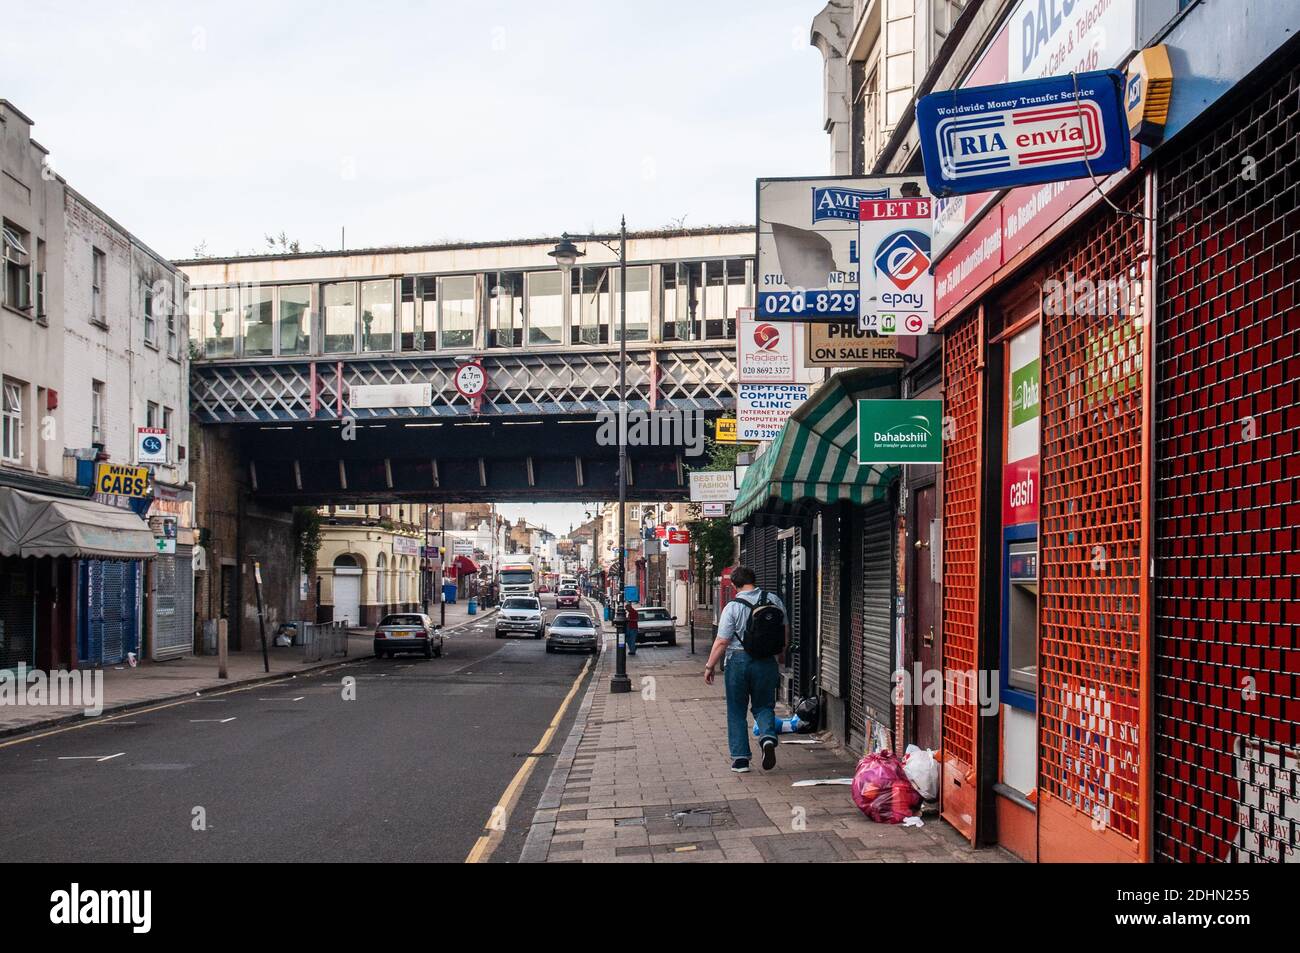 London, England, UK - July 1, 2010: Empty shops and low rent businesses line Deptford High Street in South East London following the 'credit crunch' r Stock Photo